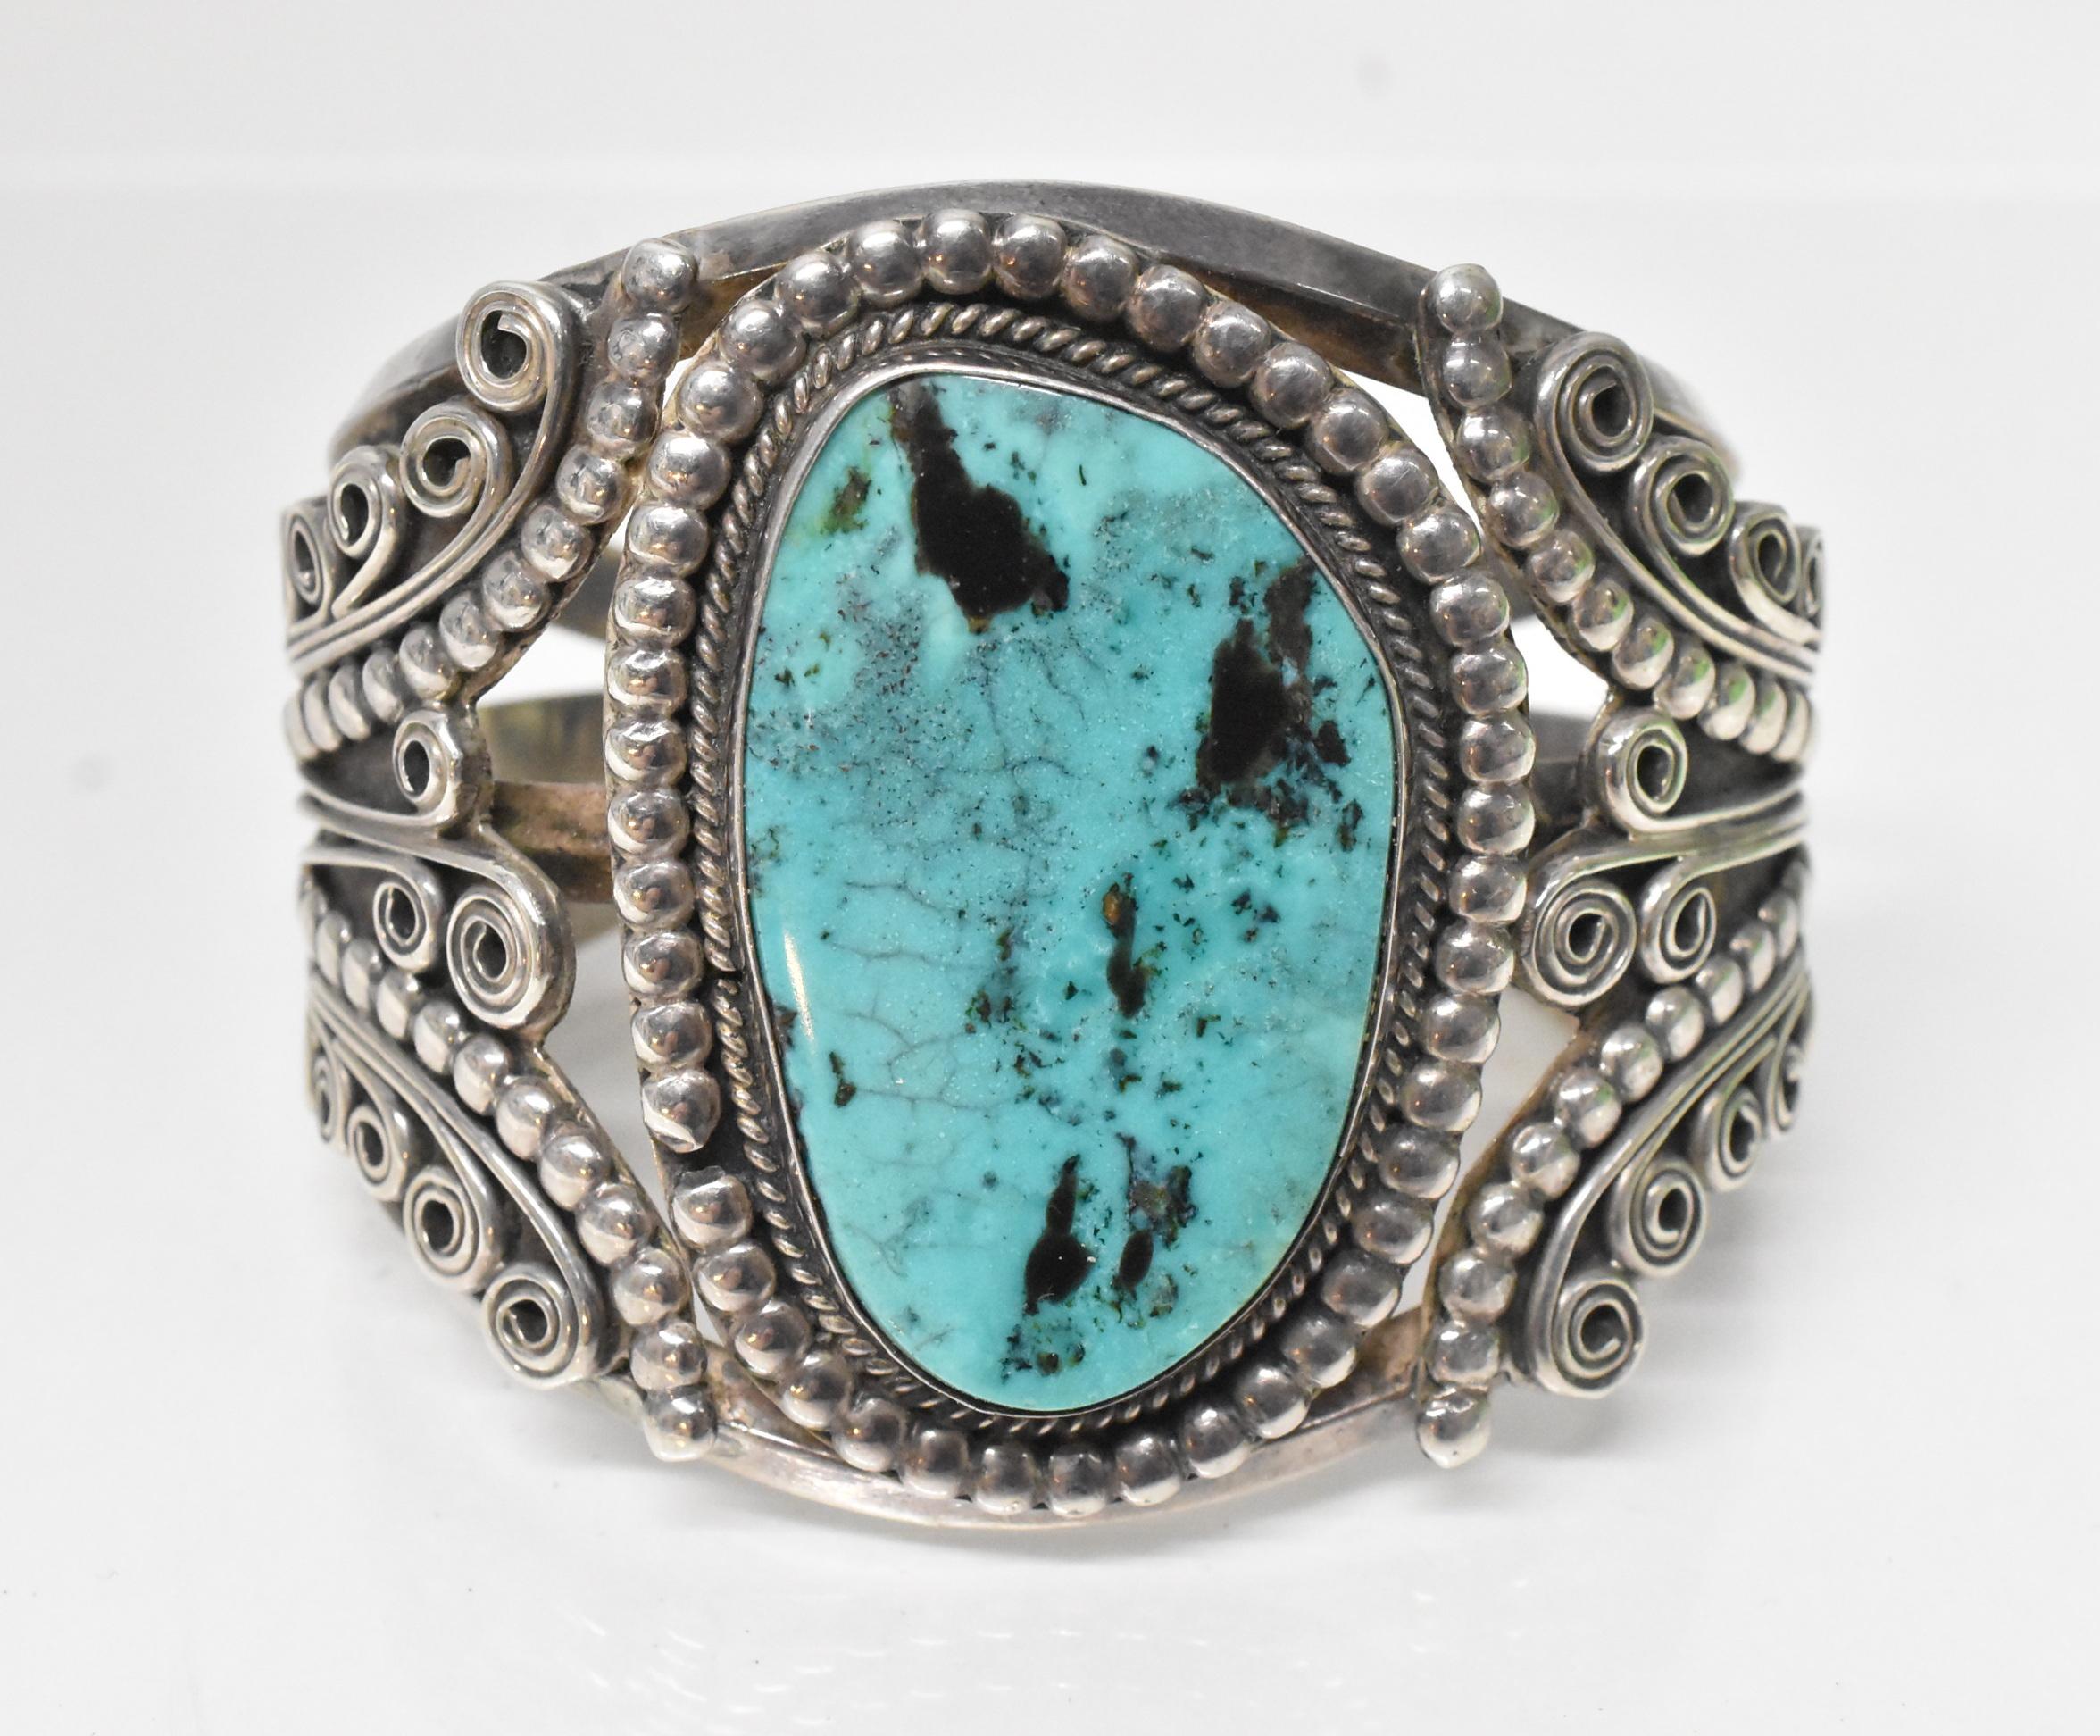 Vintage tested sterling silver and turquoise cuff bracelet. Very good condition. Stone measures 1 3/4